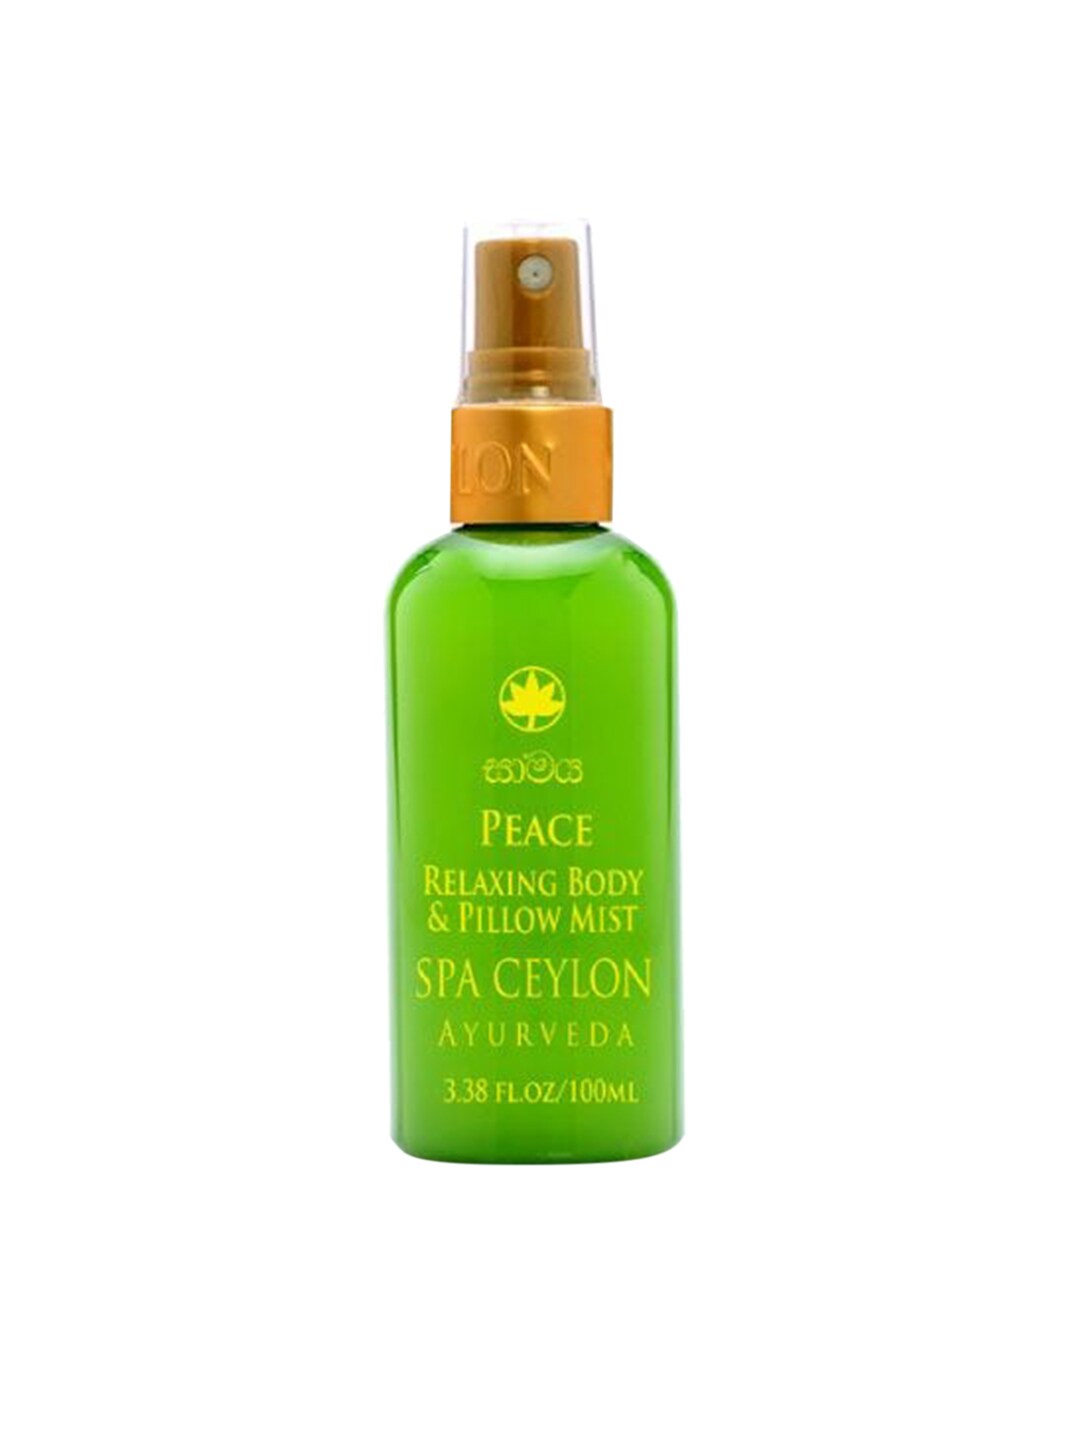 SPA CEYLON Peace Relaxing Body & Pillow Mist - 100ml Price in India